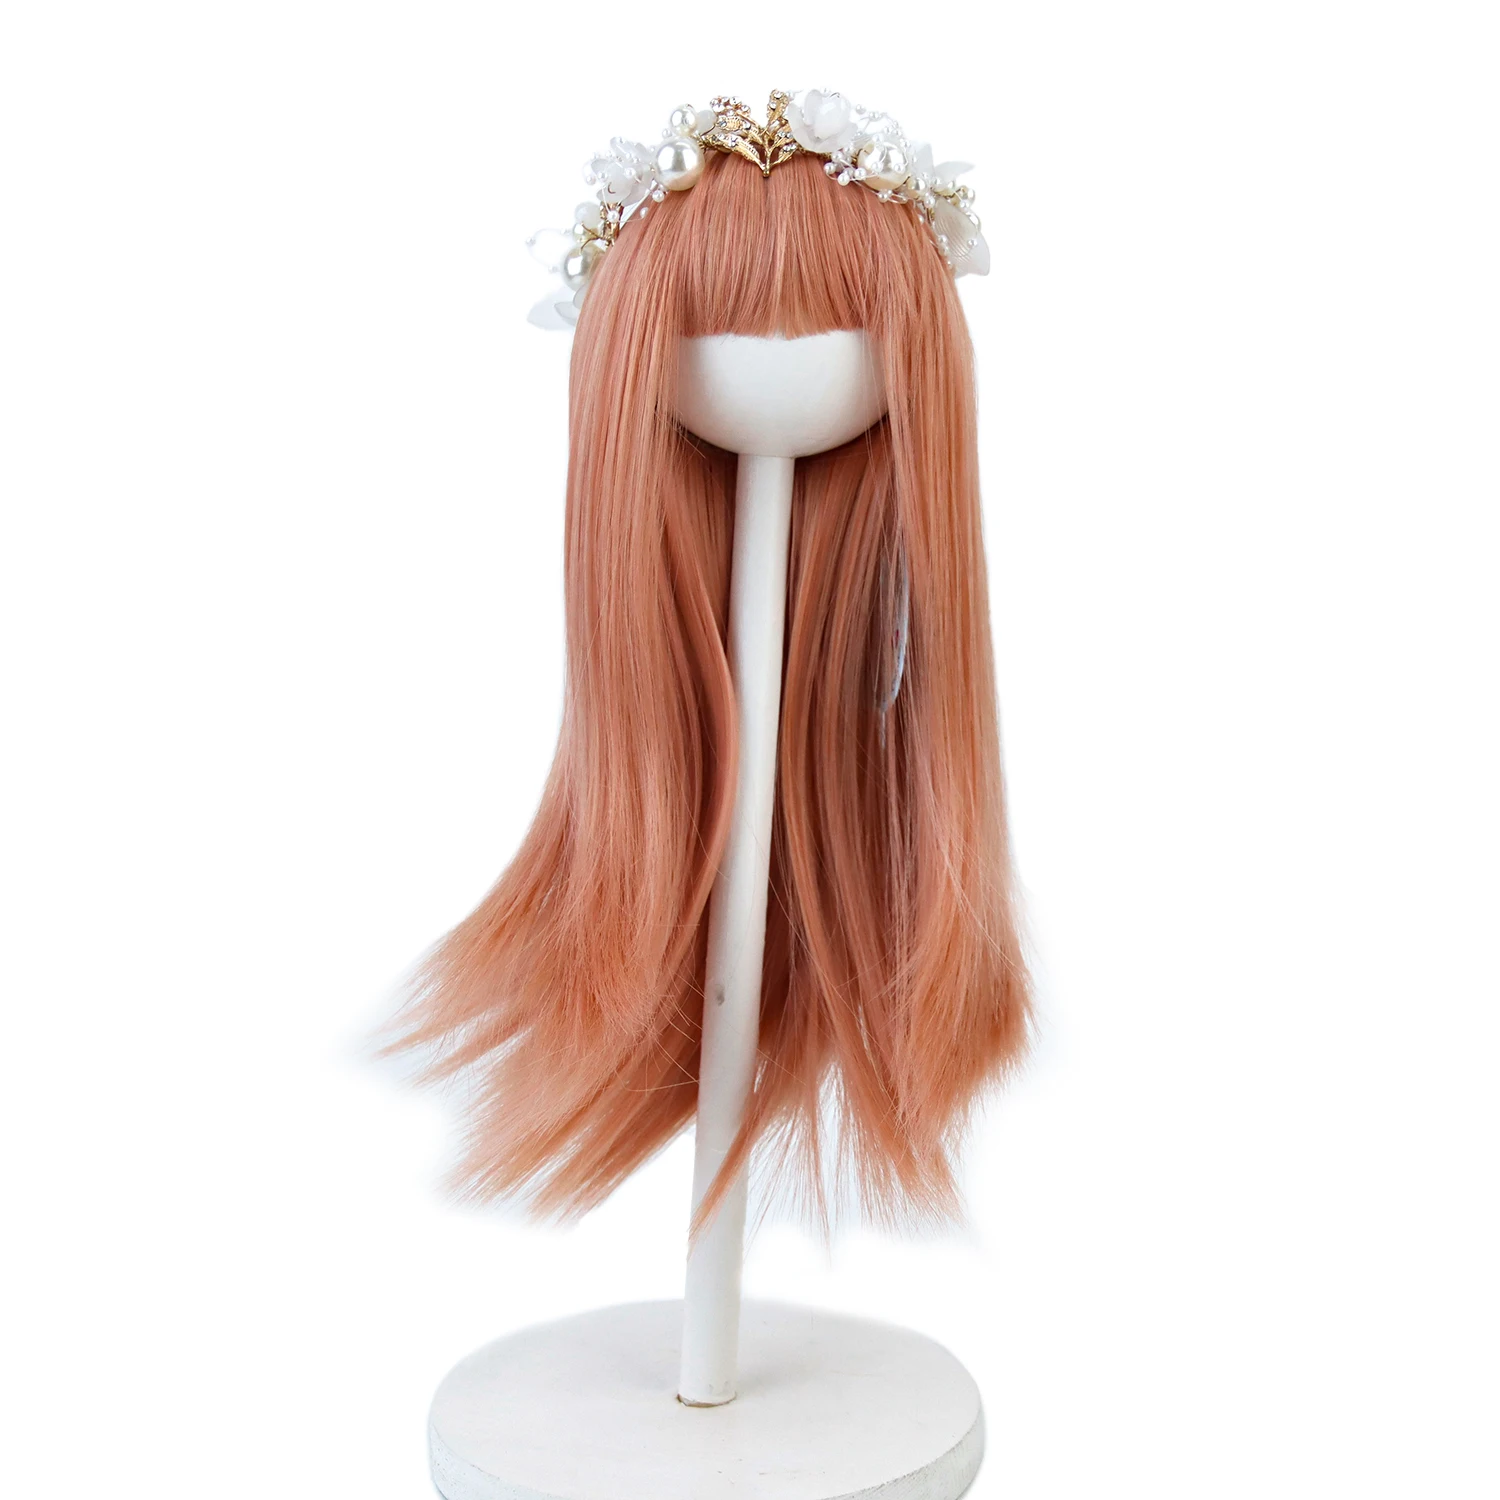 Doll Wig Long Natural Straight With Bangs Heat Resistant Synthetic Fiber Girls Doll Hair For 18'' American Doll aidolla doll accessories 1 3 bjd doll wig middle length bangs straight hair blue high temperature fiber wig for diy bjd doll